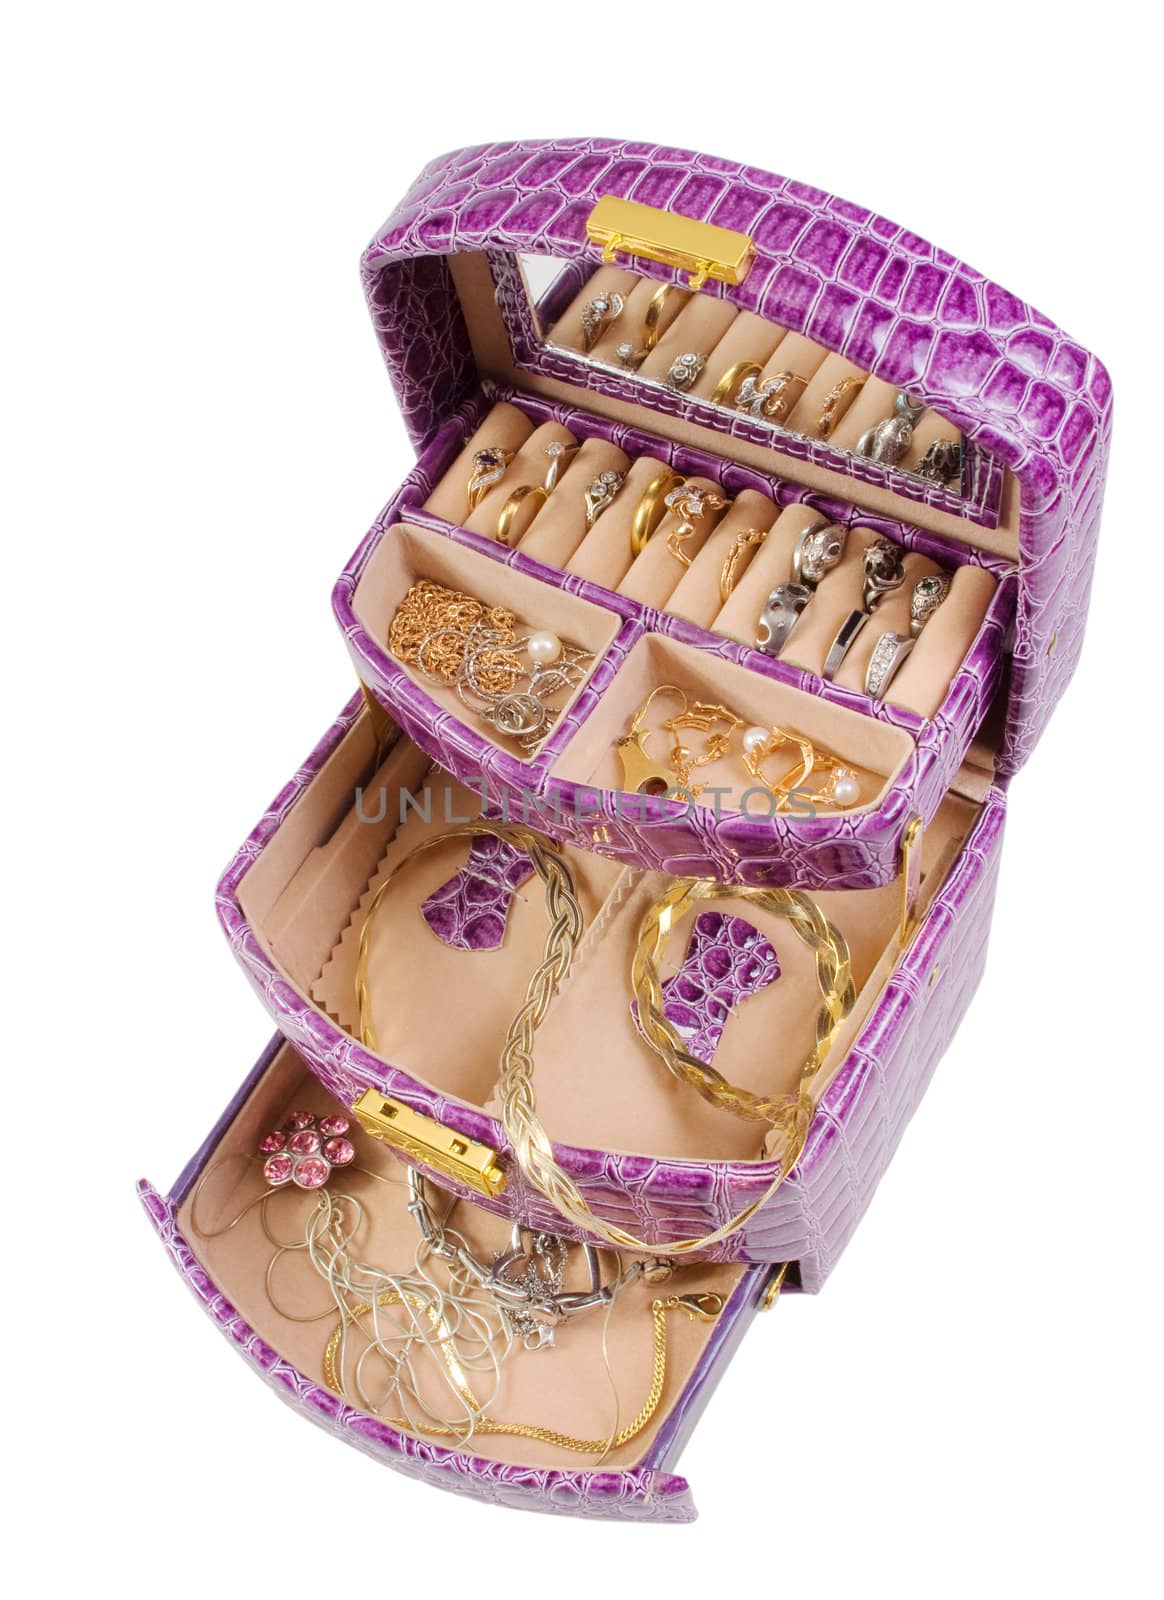 Lilac box with golden jewelry by BIG_TAU